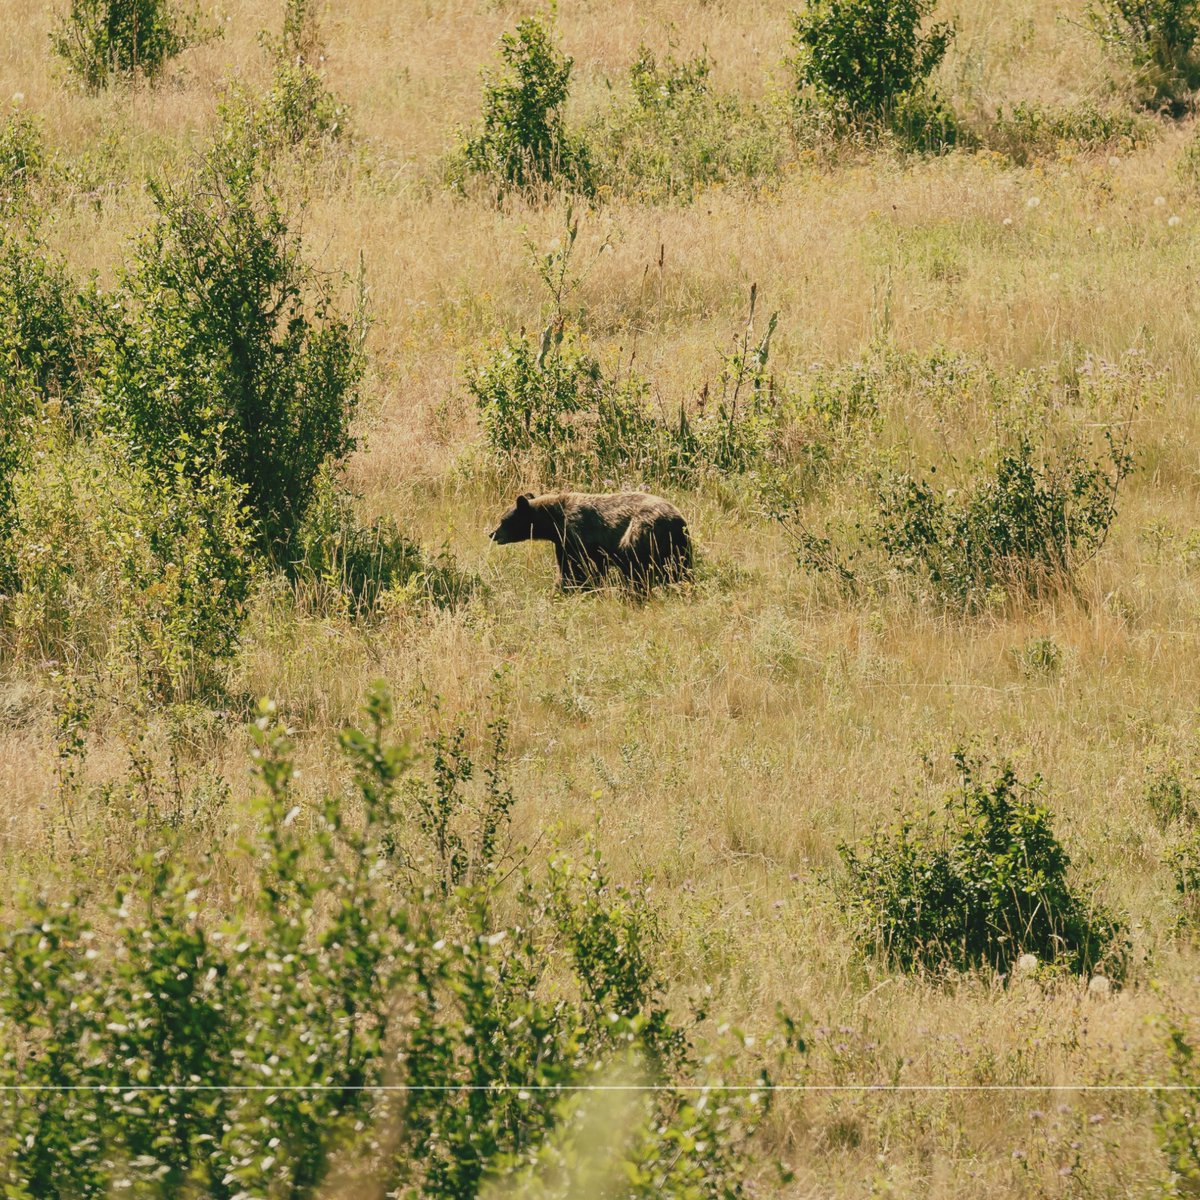 A chance encounter with a bear, a reminder of the untamed beauty that lies within our lands.

#propertymapping #landidentity #property #realestate #mobileapp #propertyboundaries #propertyinfo #parcel #mapping #maps #mobilemapping #map #parceldata #propertyinformation #landid